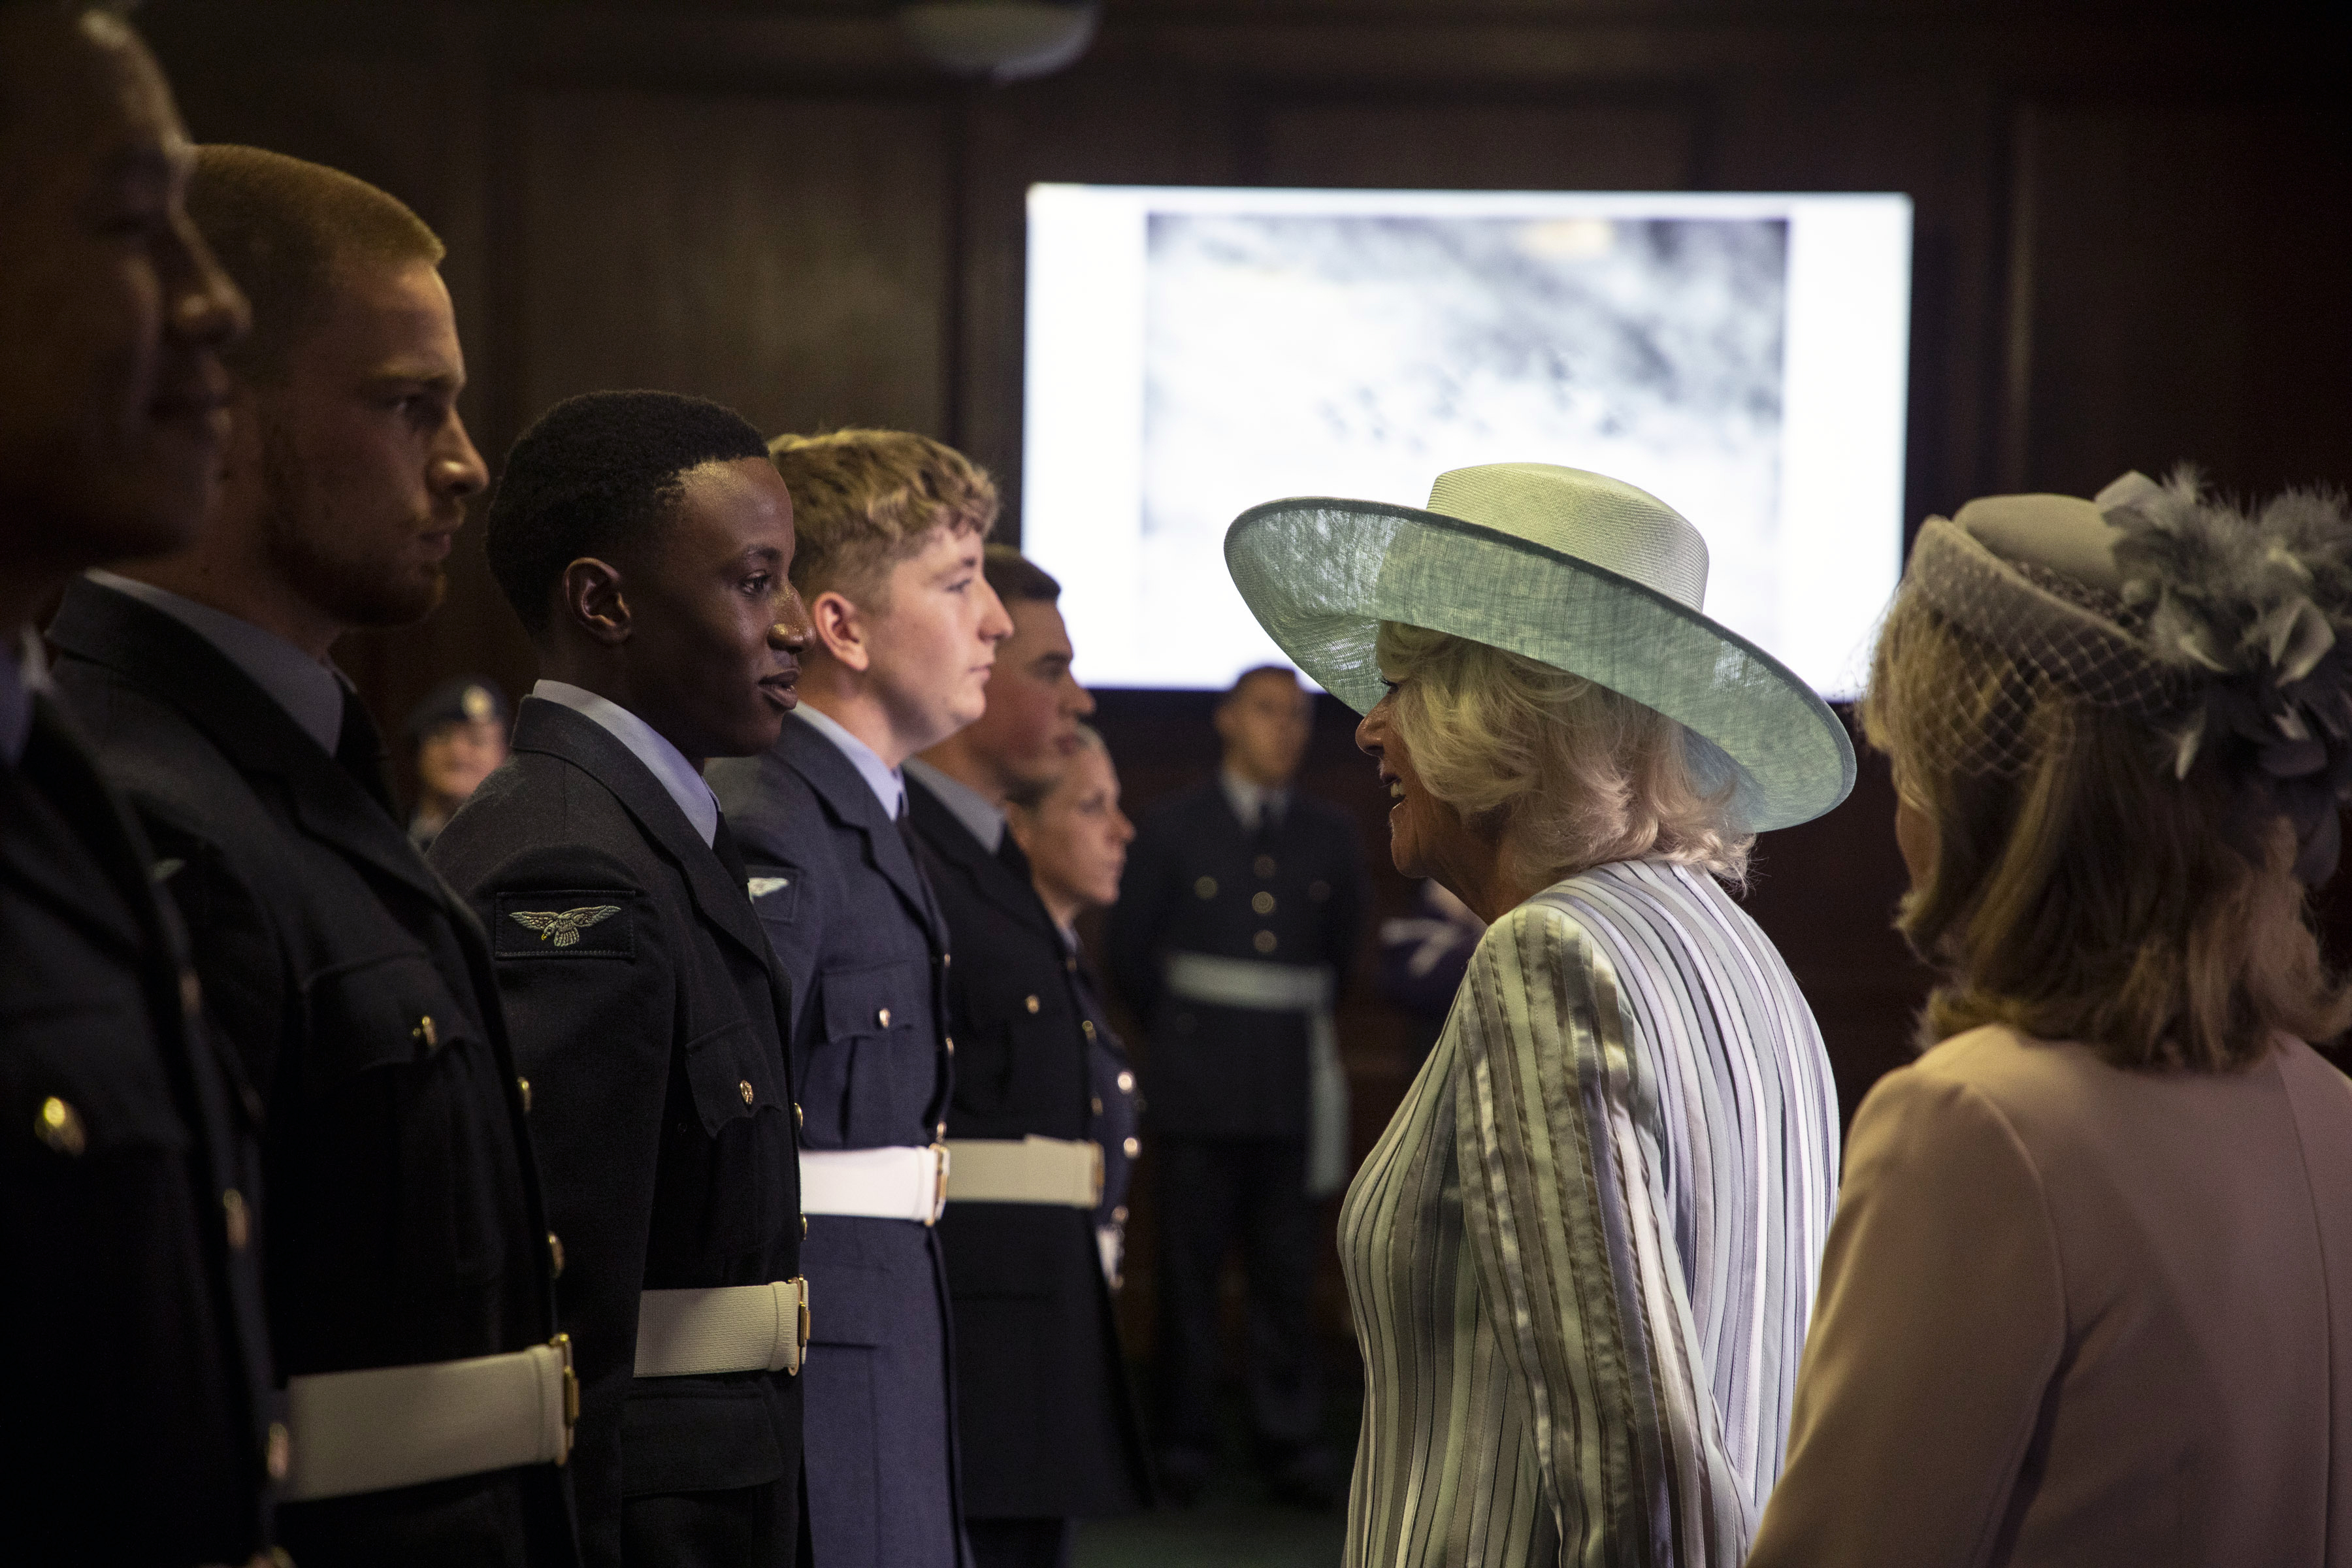 Her Royal Highness speaks with personnel.